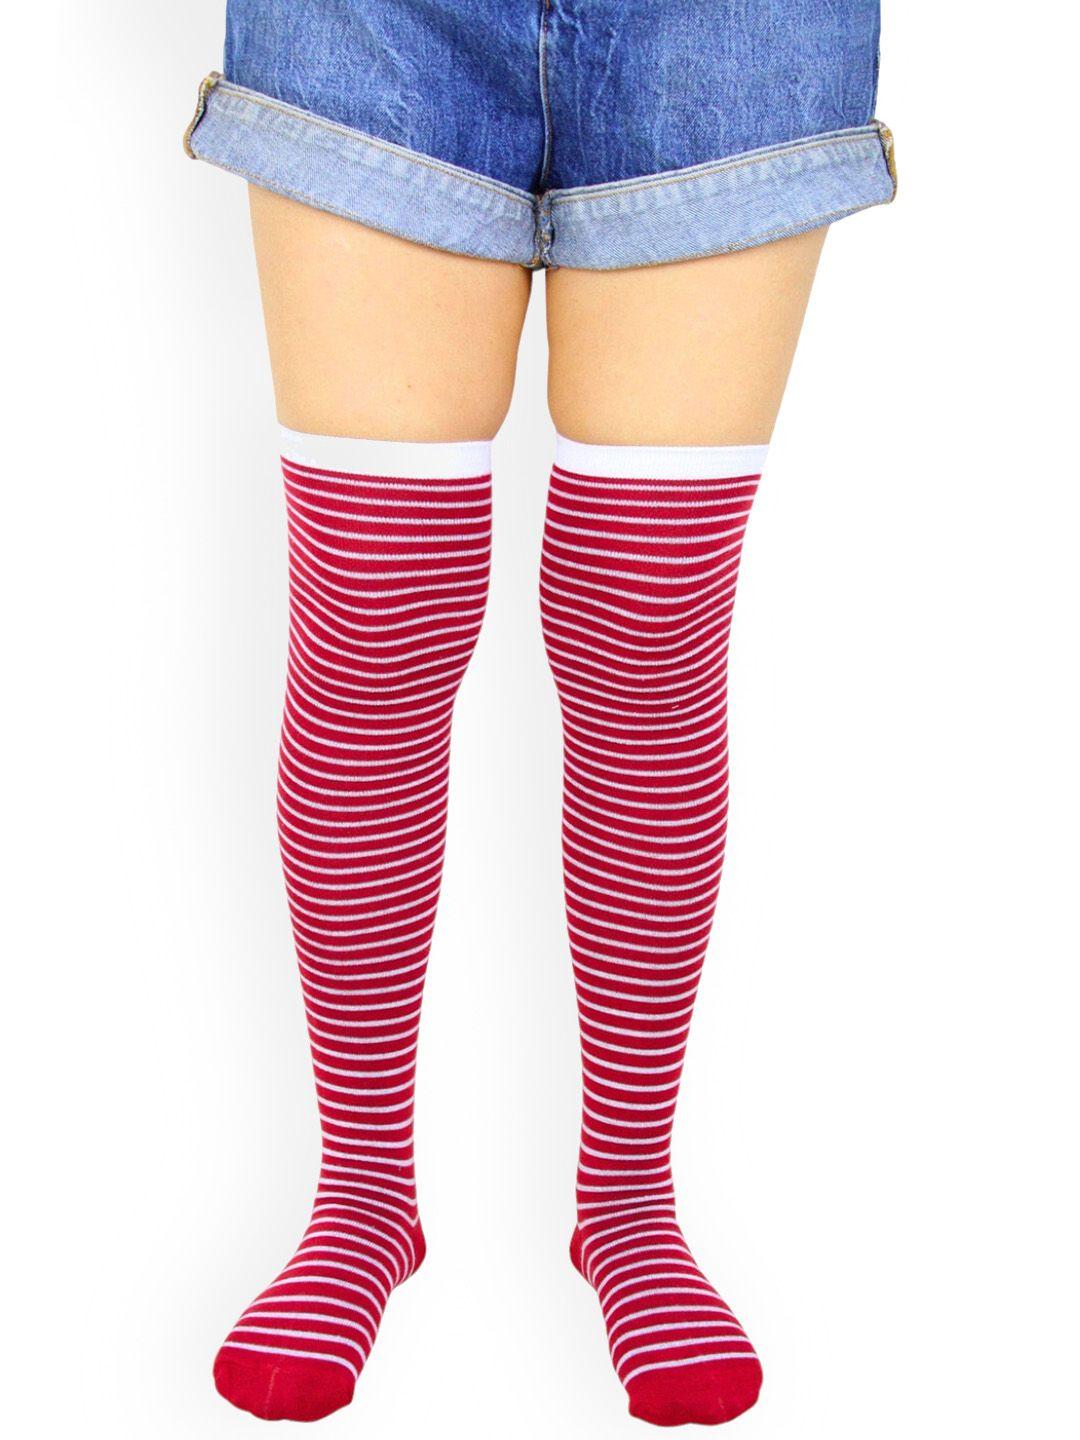 baesd striped cotton patterned above knee stockings